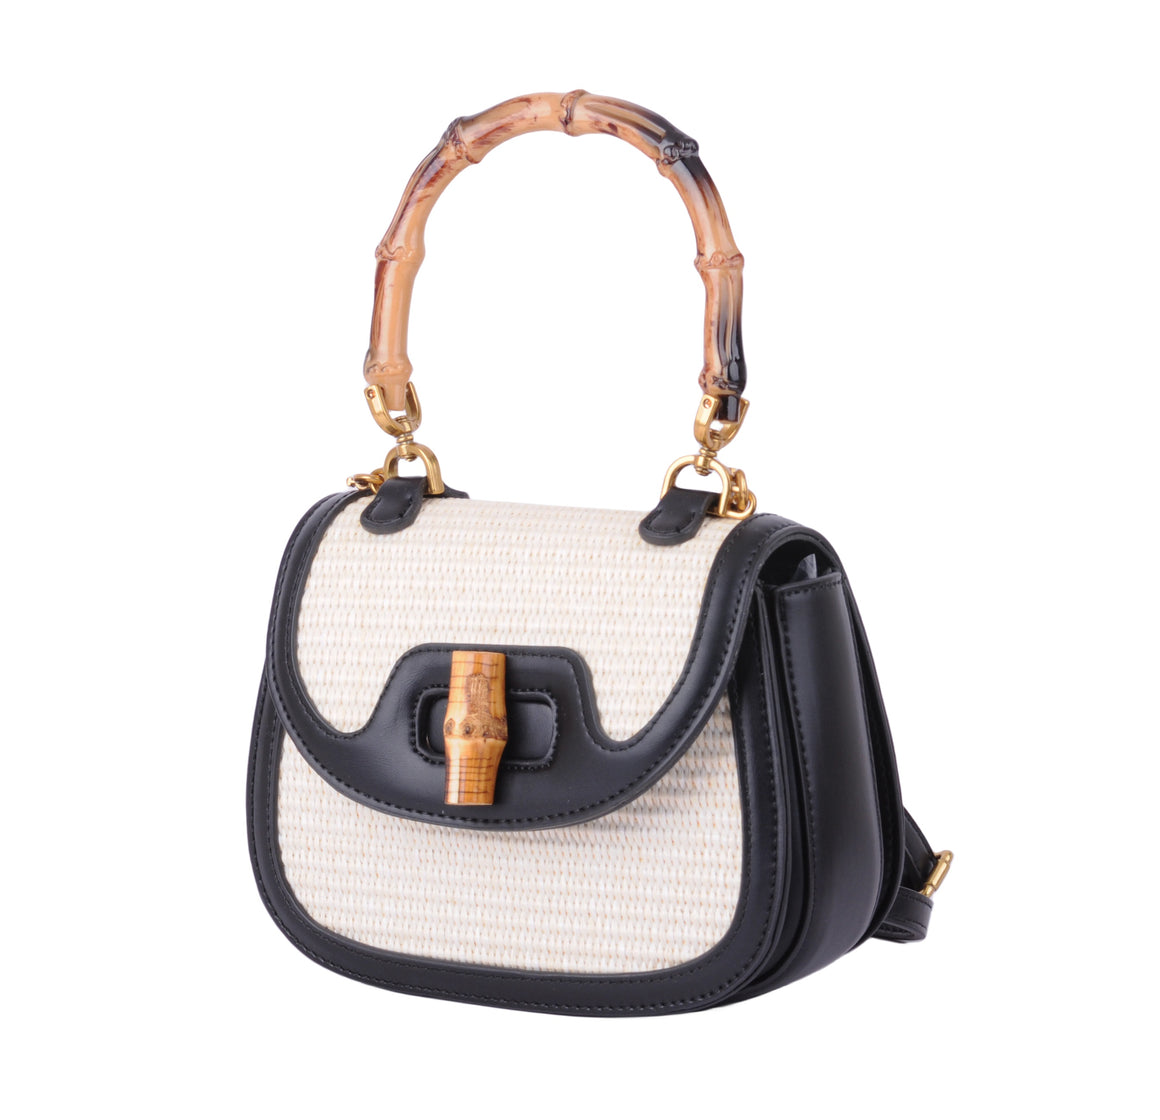 1634 - Bamboo Bliss: Top Handle Saddle Bag with Raffia Body and PU Trims